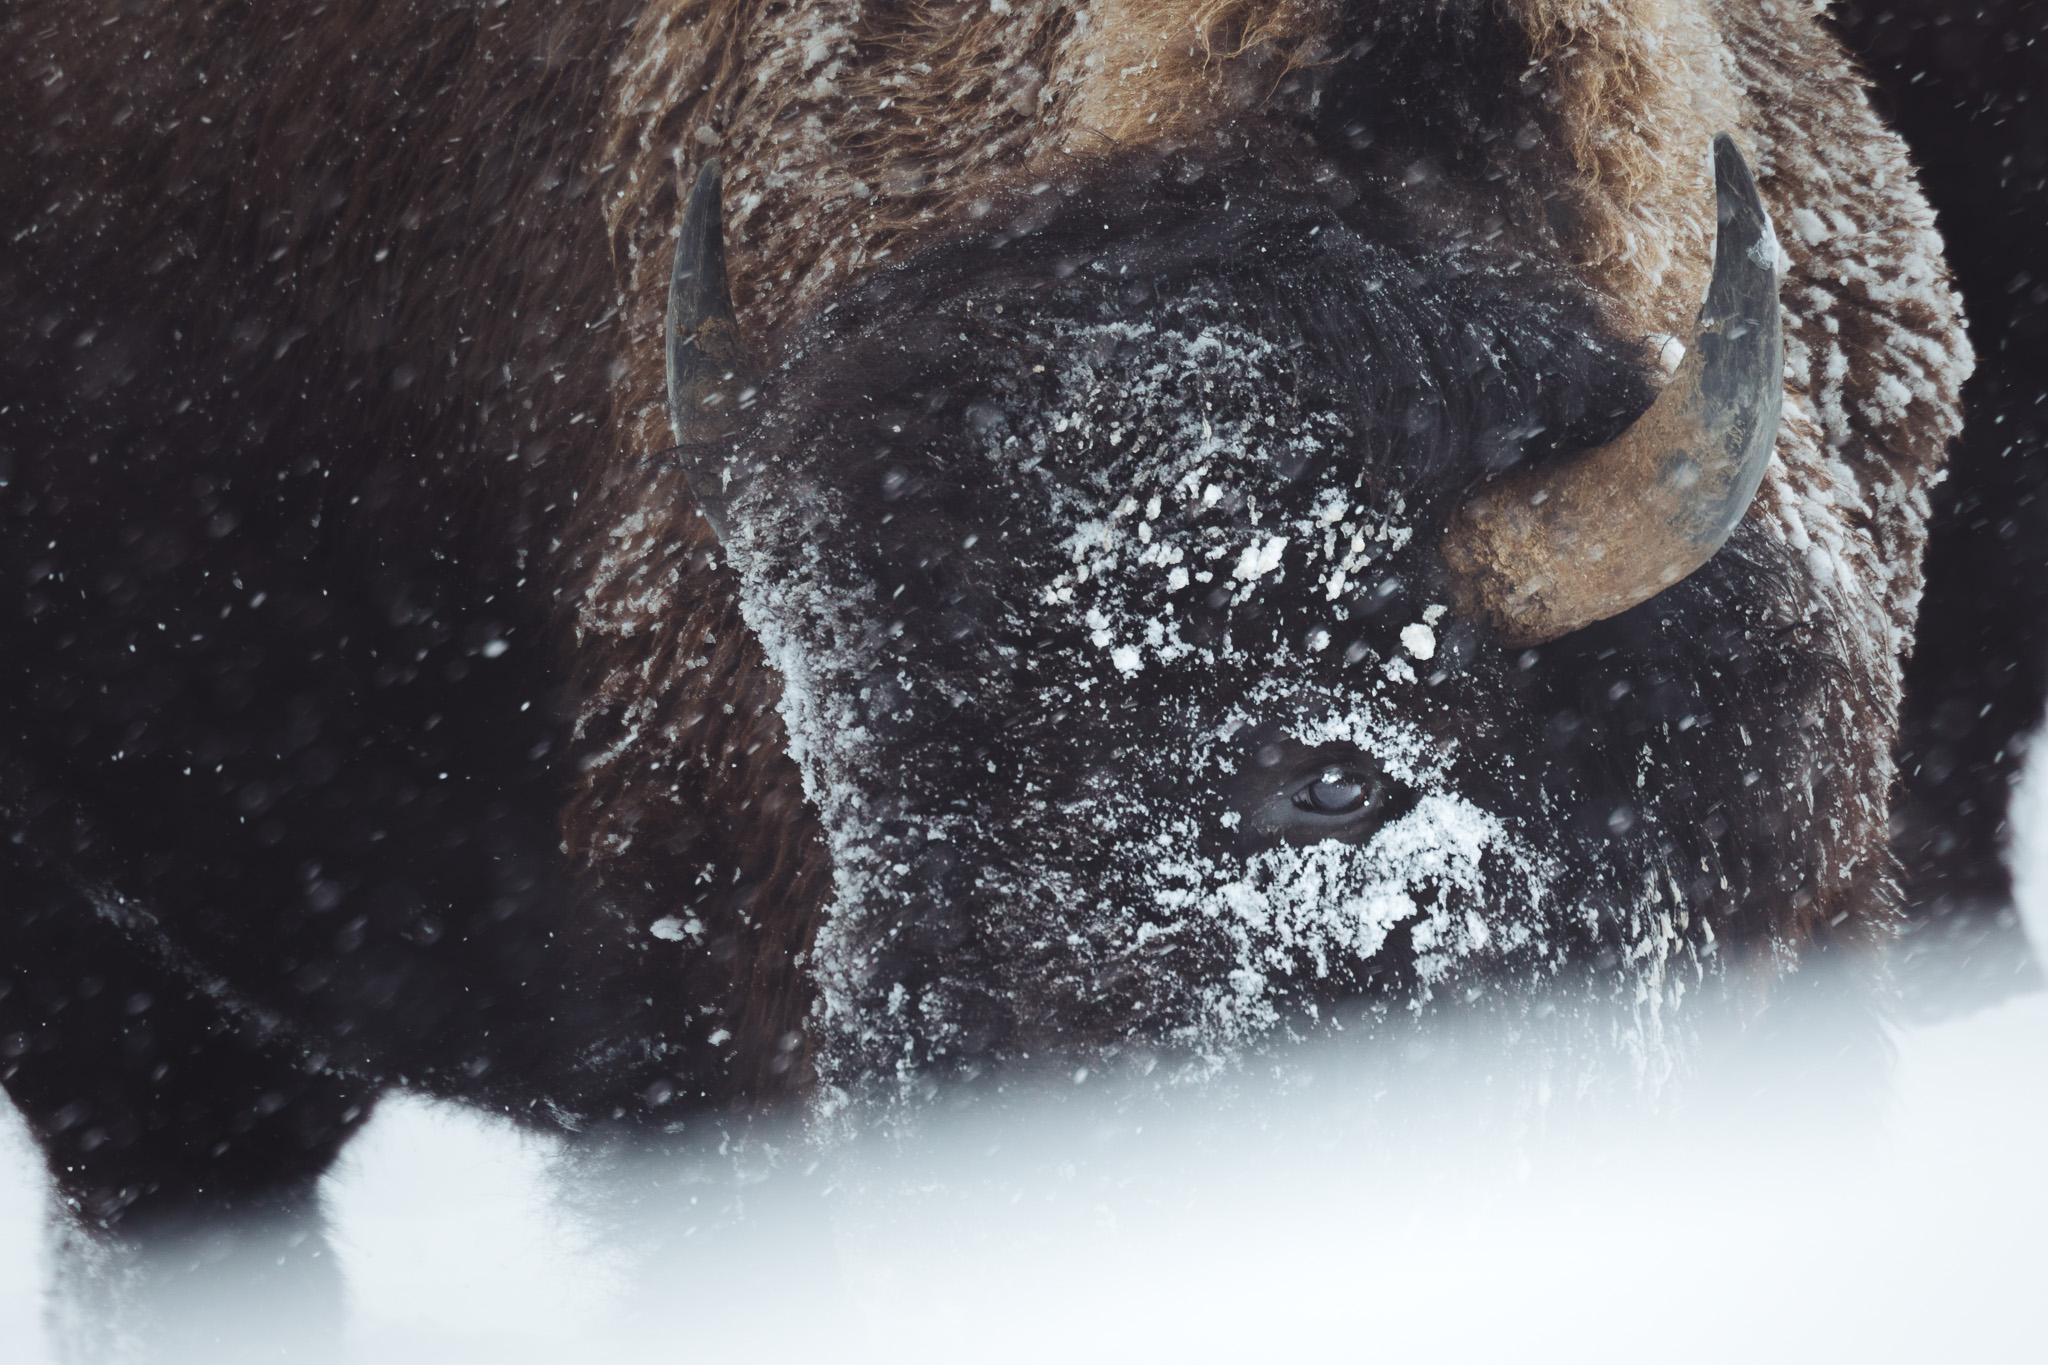 What to Expect on a Yellowstone Winter Photography Workshop